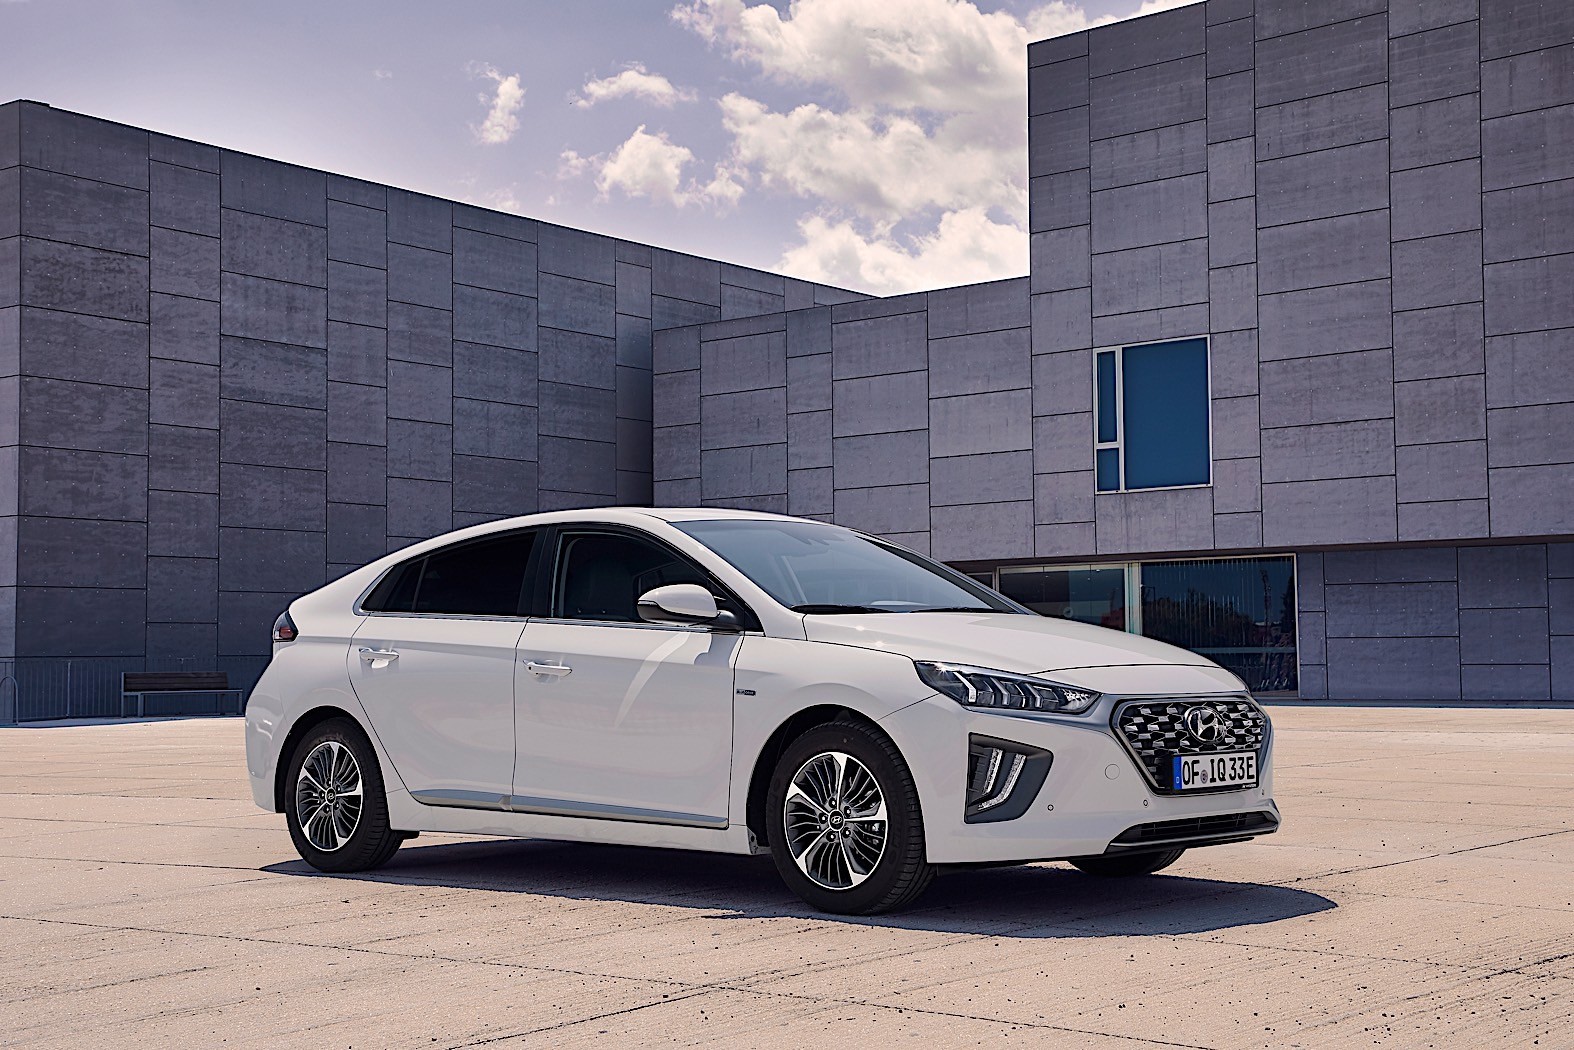 2020-hyundai-ioniq-gets-updated-comes-with-more-range-and-connectivity